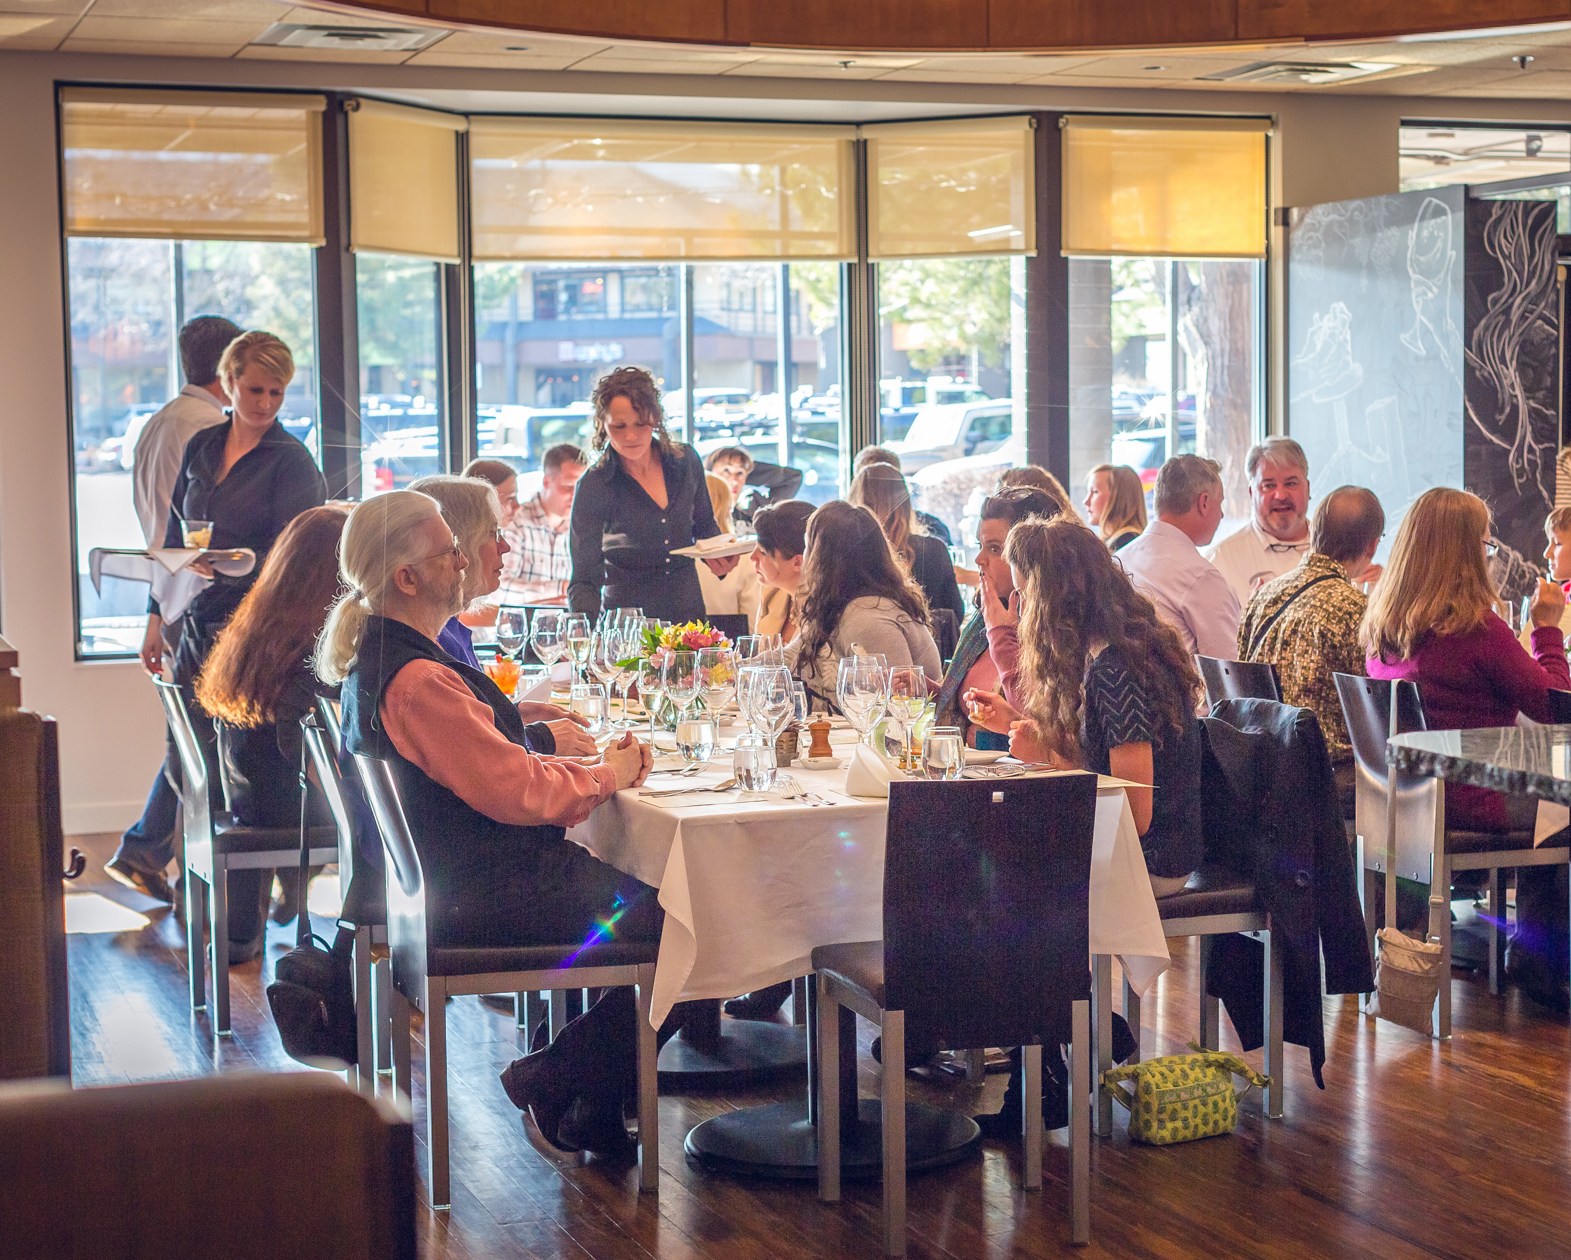 Arugula is proud to offer one of the best dinner spots in Boulder, including an incredible happy hour and delicious tapas, plus gluten-free, vegetarian, & vegan dishes.